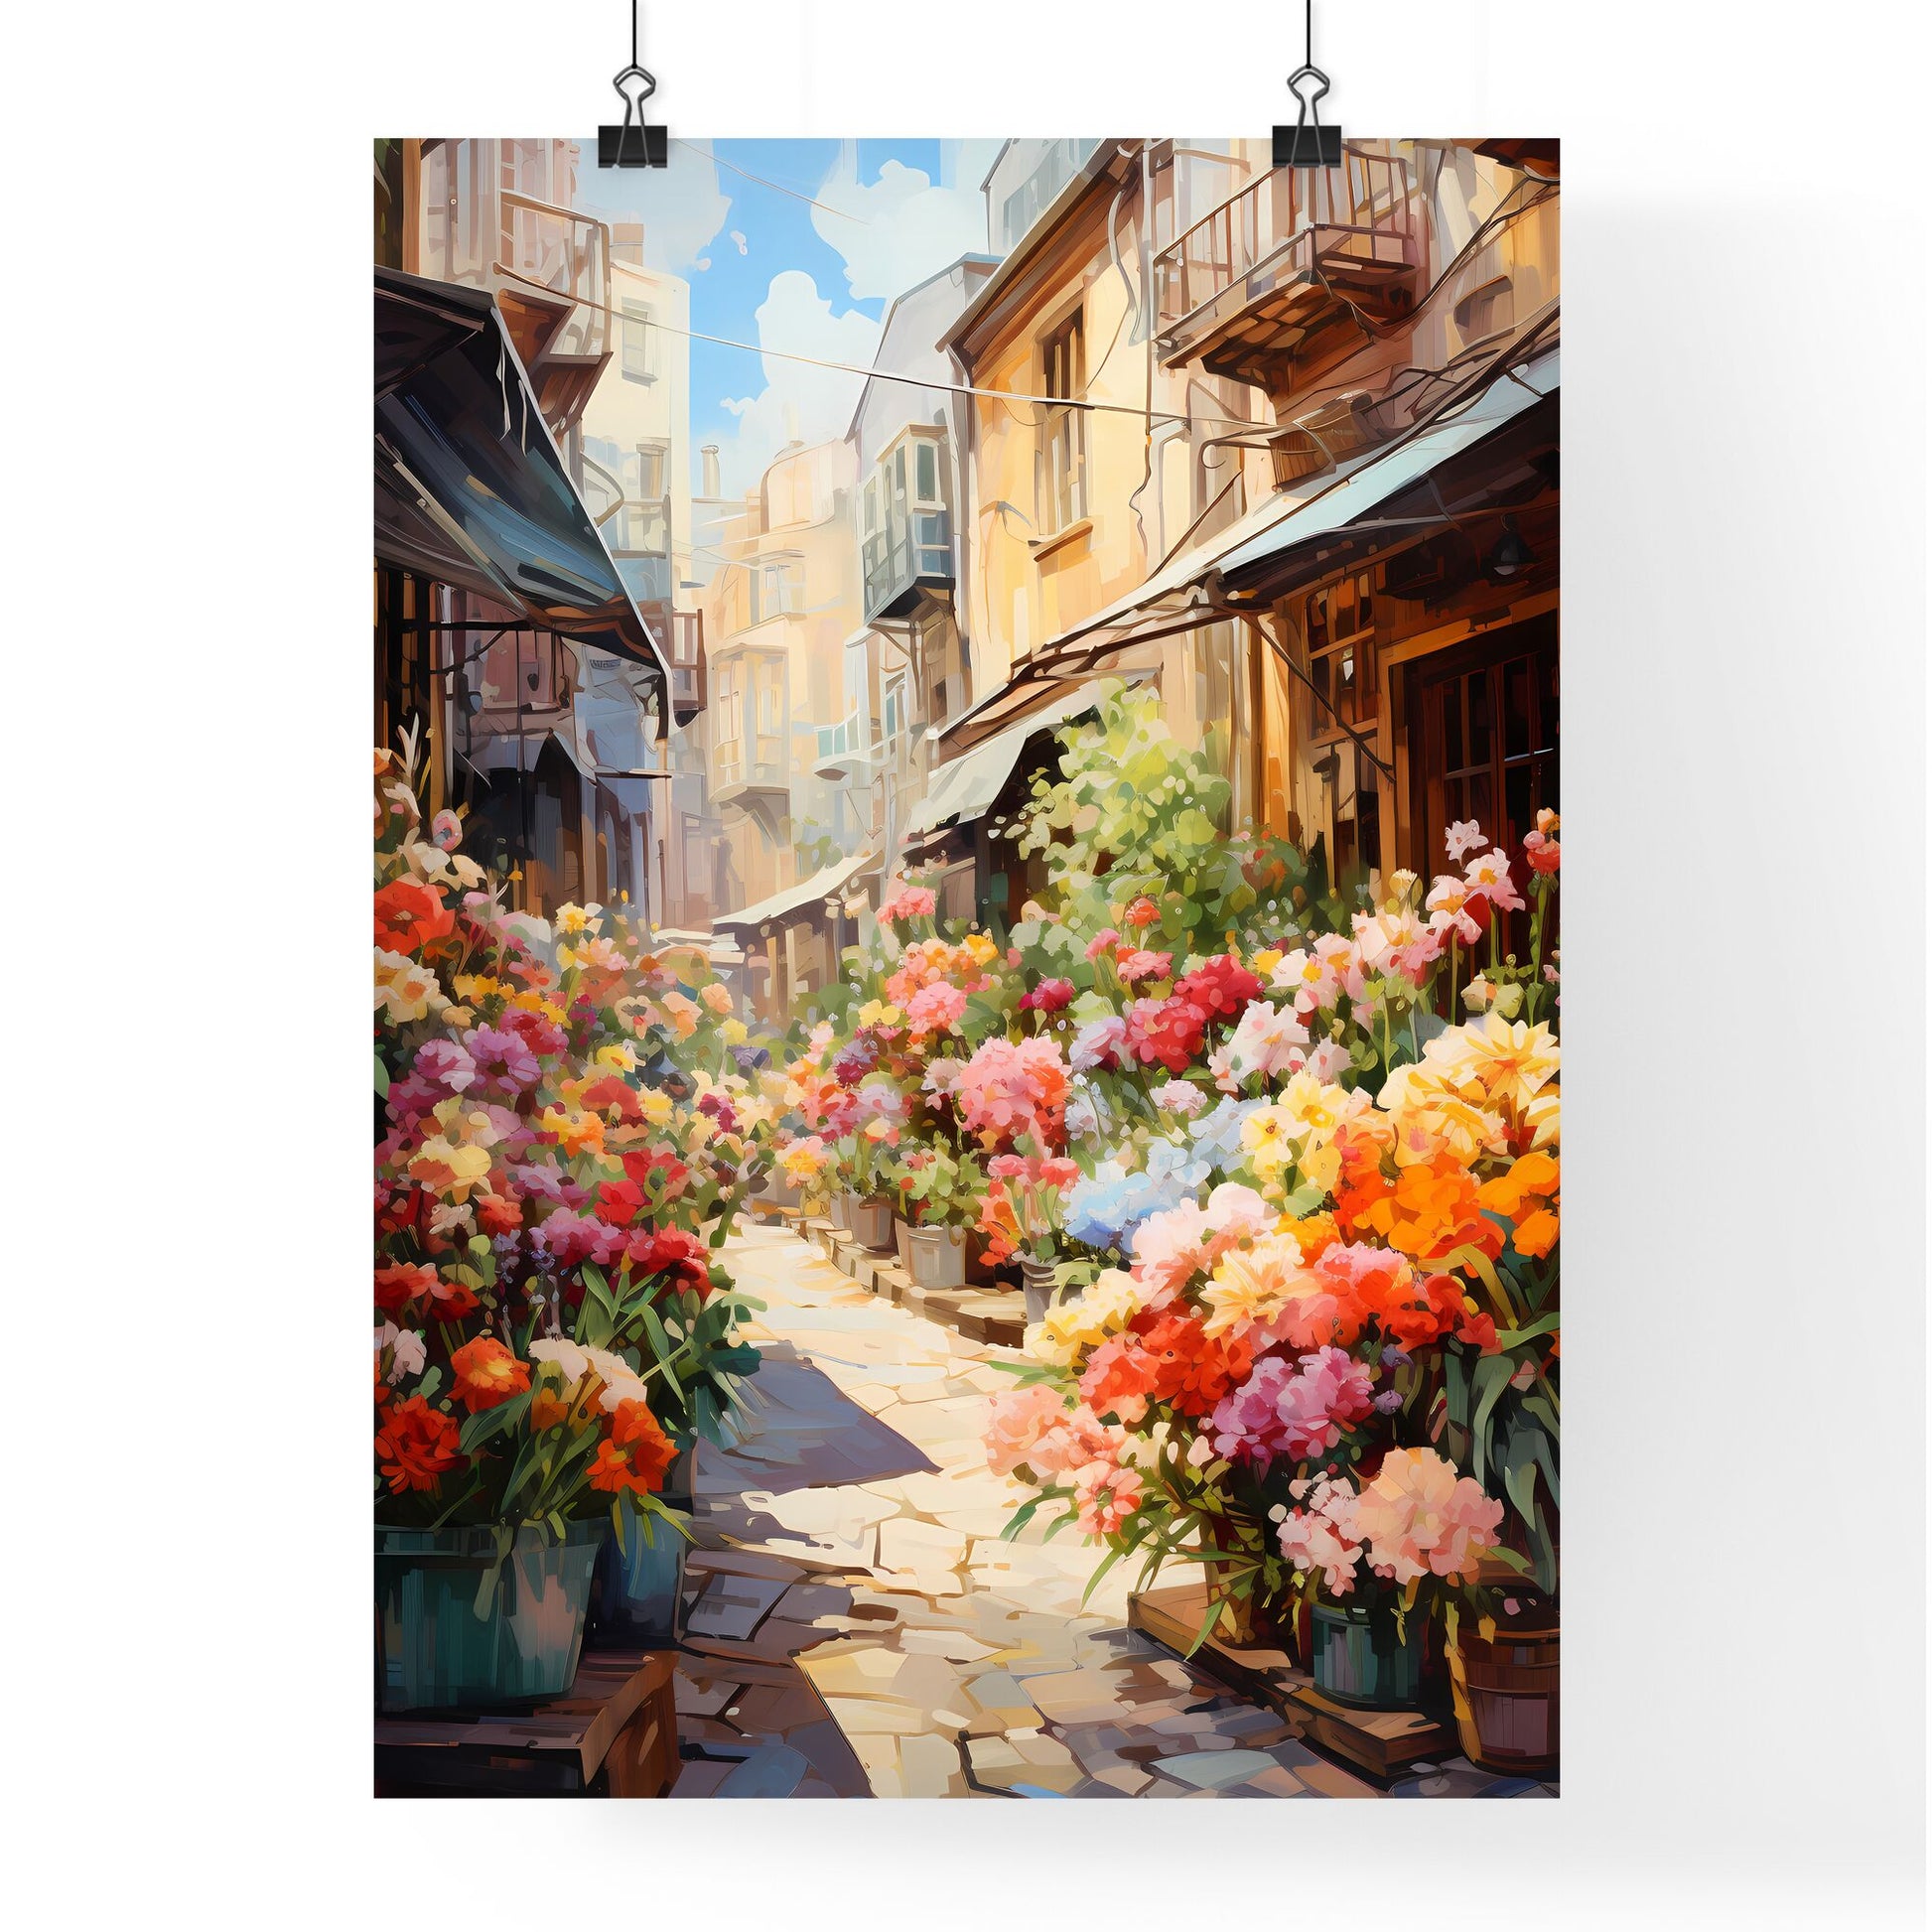 Street With Flowers In Pots Art Print Default Title